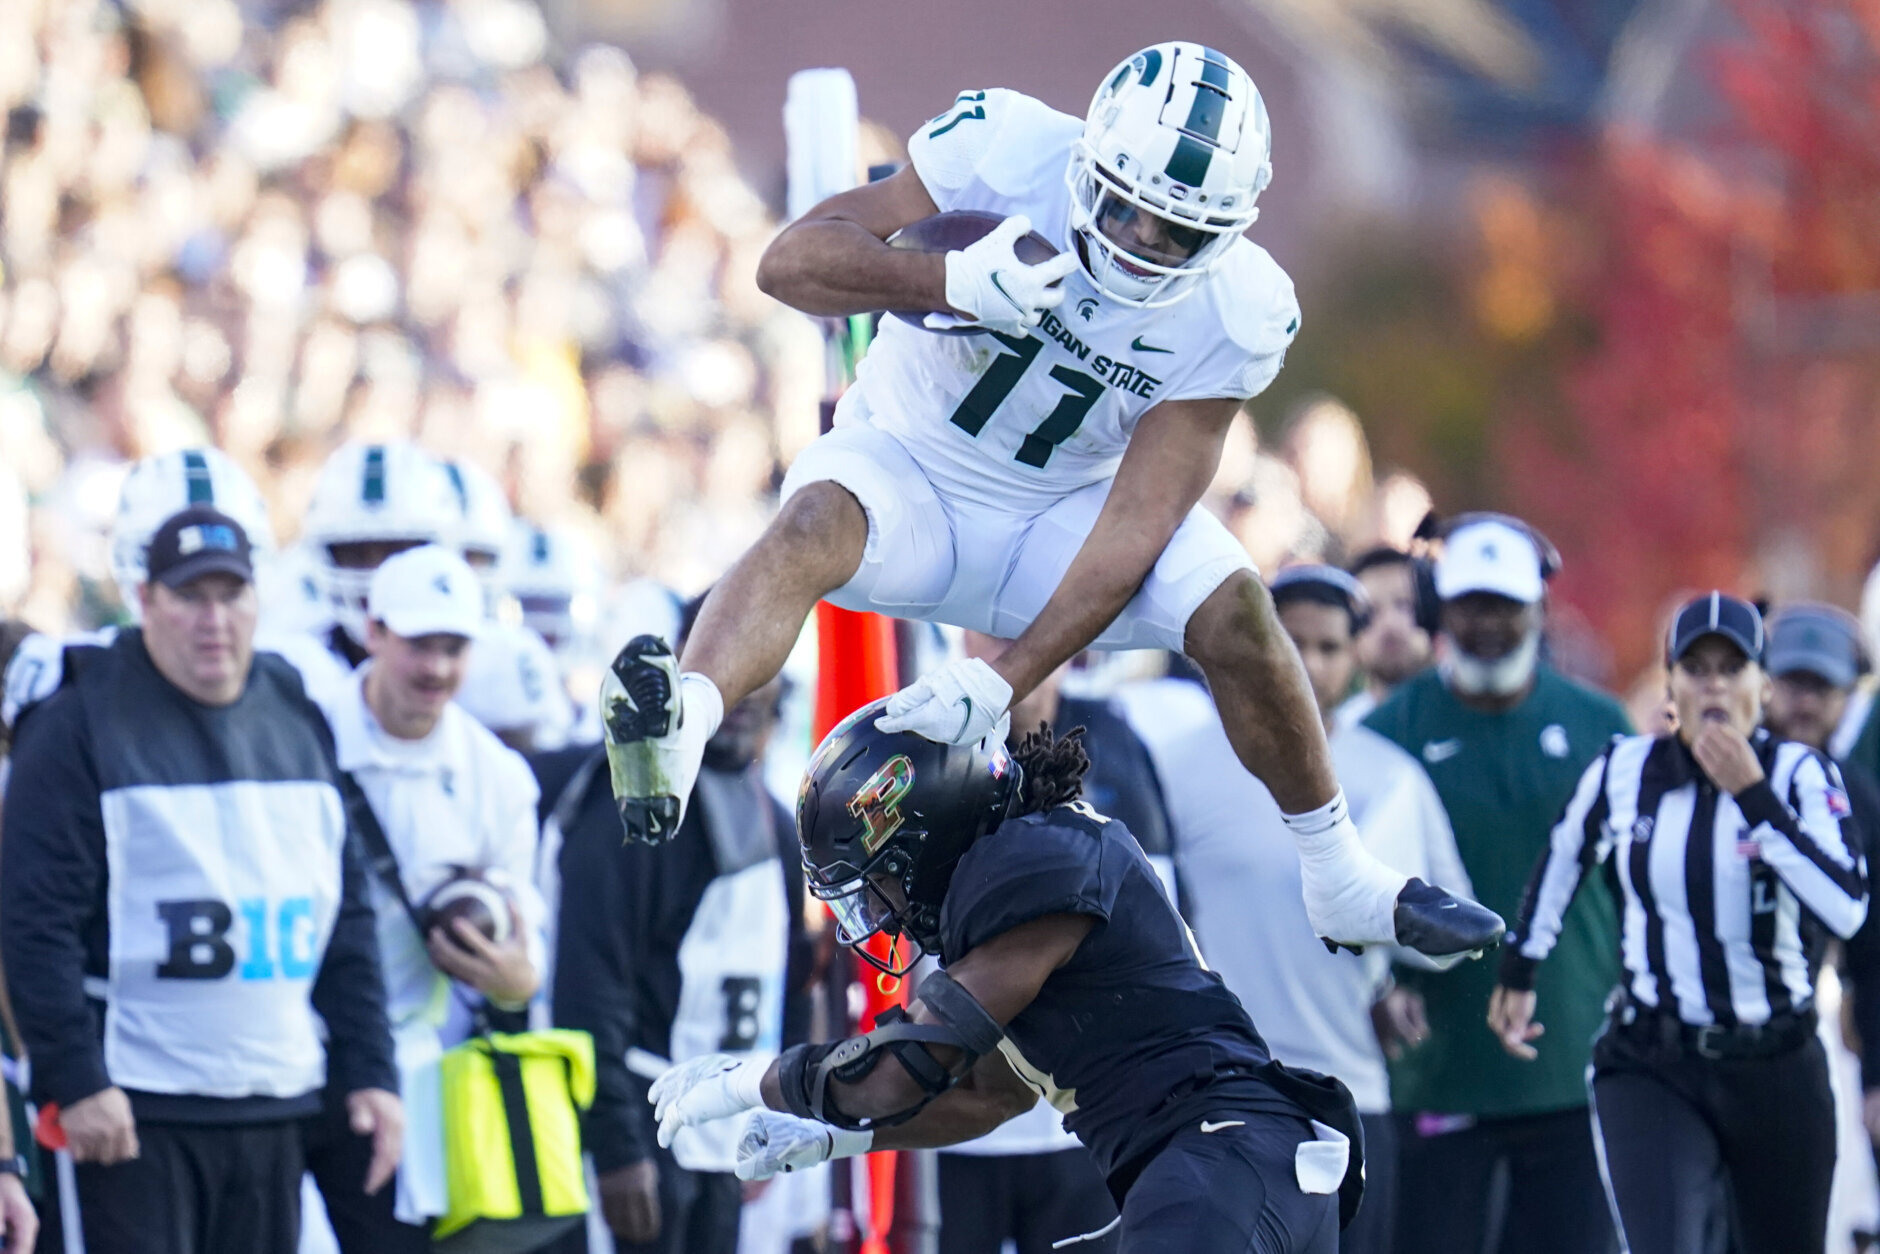 <p><strong>Round 7 (240th overall) &#8212; Connor Heyward, TE Michigan State</strong></p>
<p>Heyward lacks the size (a top-heavy 5-foot-11, 233 pounds is the antitype for a tight end) and speed (4.72 in the 40-yard dash) to be anything more than a draft day afterthought &#8212; but he has the one thing Rivera loves in his players: Versatility.</p>
<p>Heyward is a former running back who can play in the backfield and at the line of scrimmage and comes from a famed football family (his brother is Steelers All-Pro Cameron Heyward and their father is the late Craig &#8220;Ironhead&#8221; Heyward). This would be Commanders fans&#8217; new favorite training camp player.</p>
